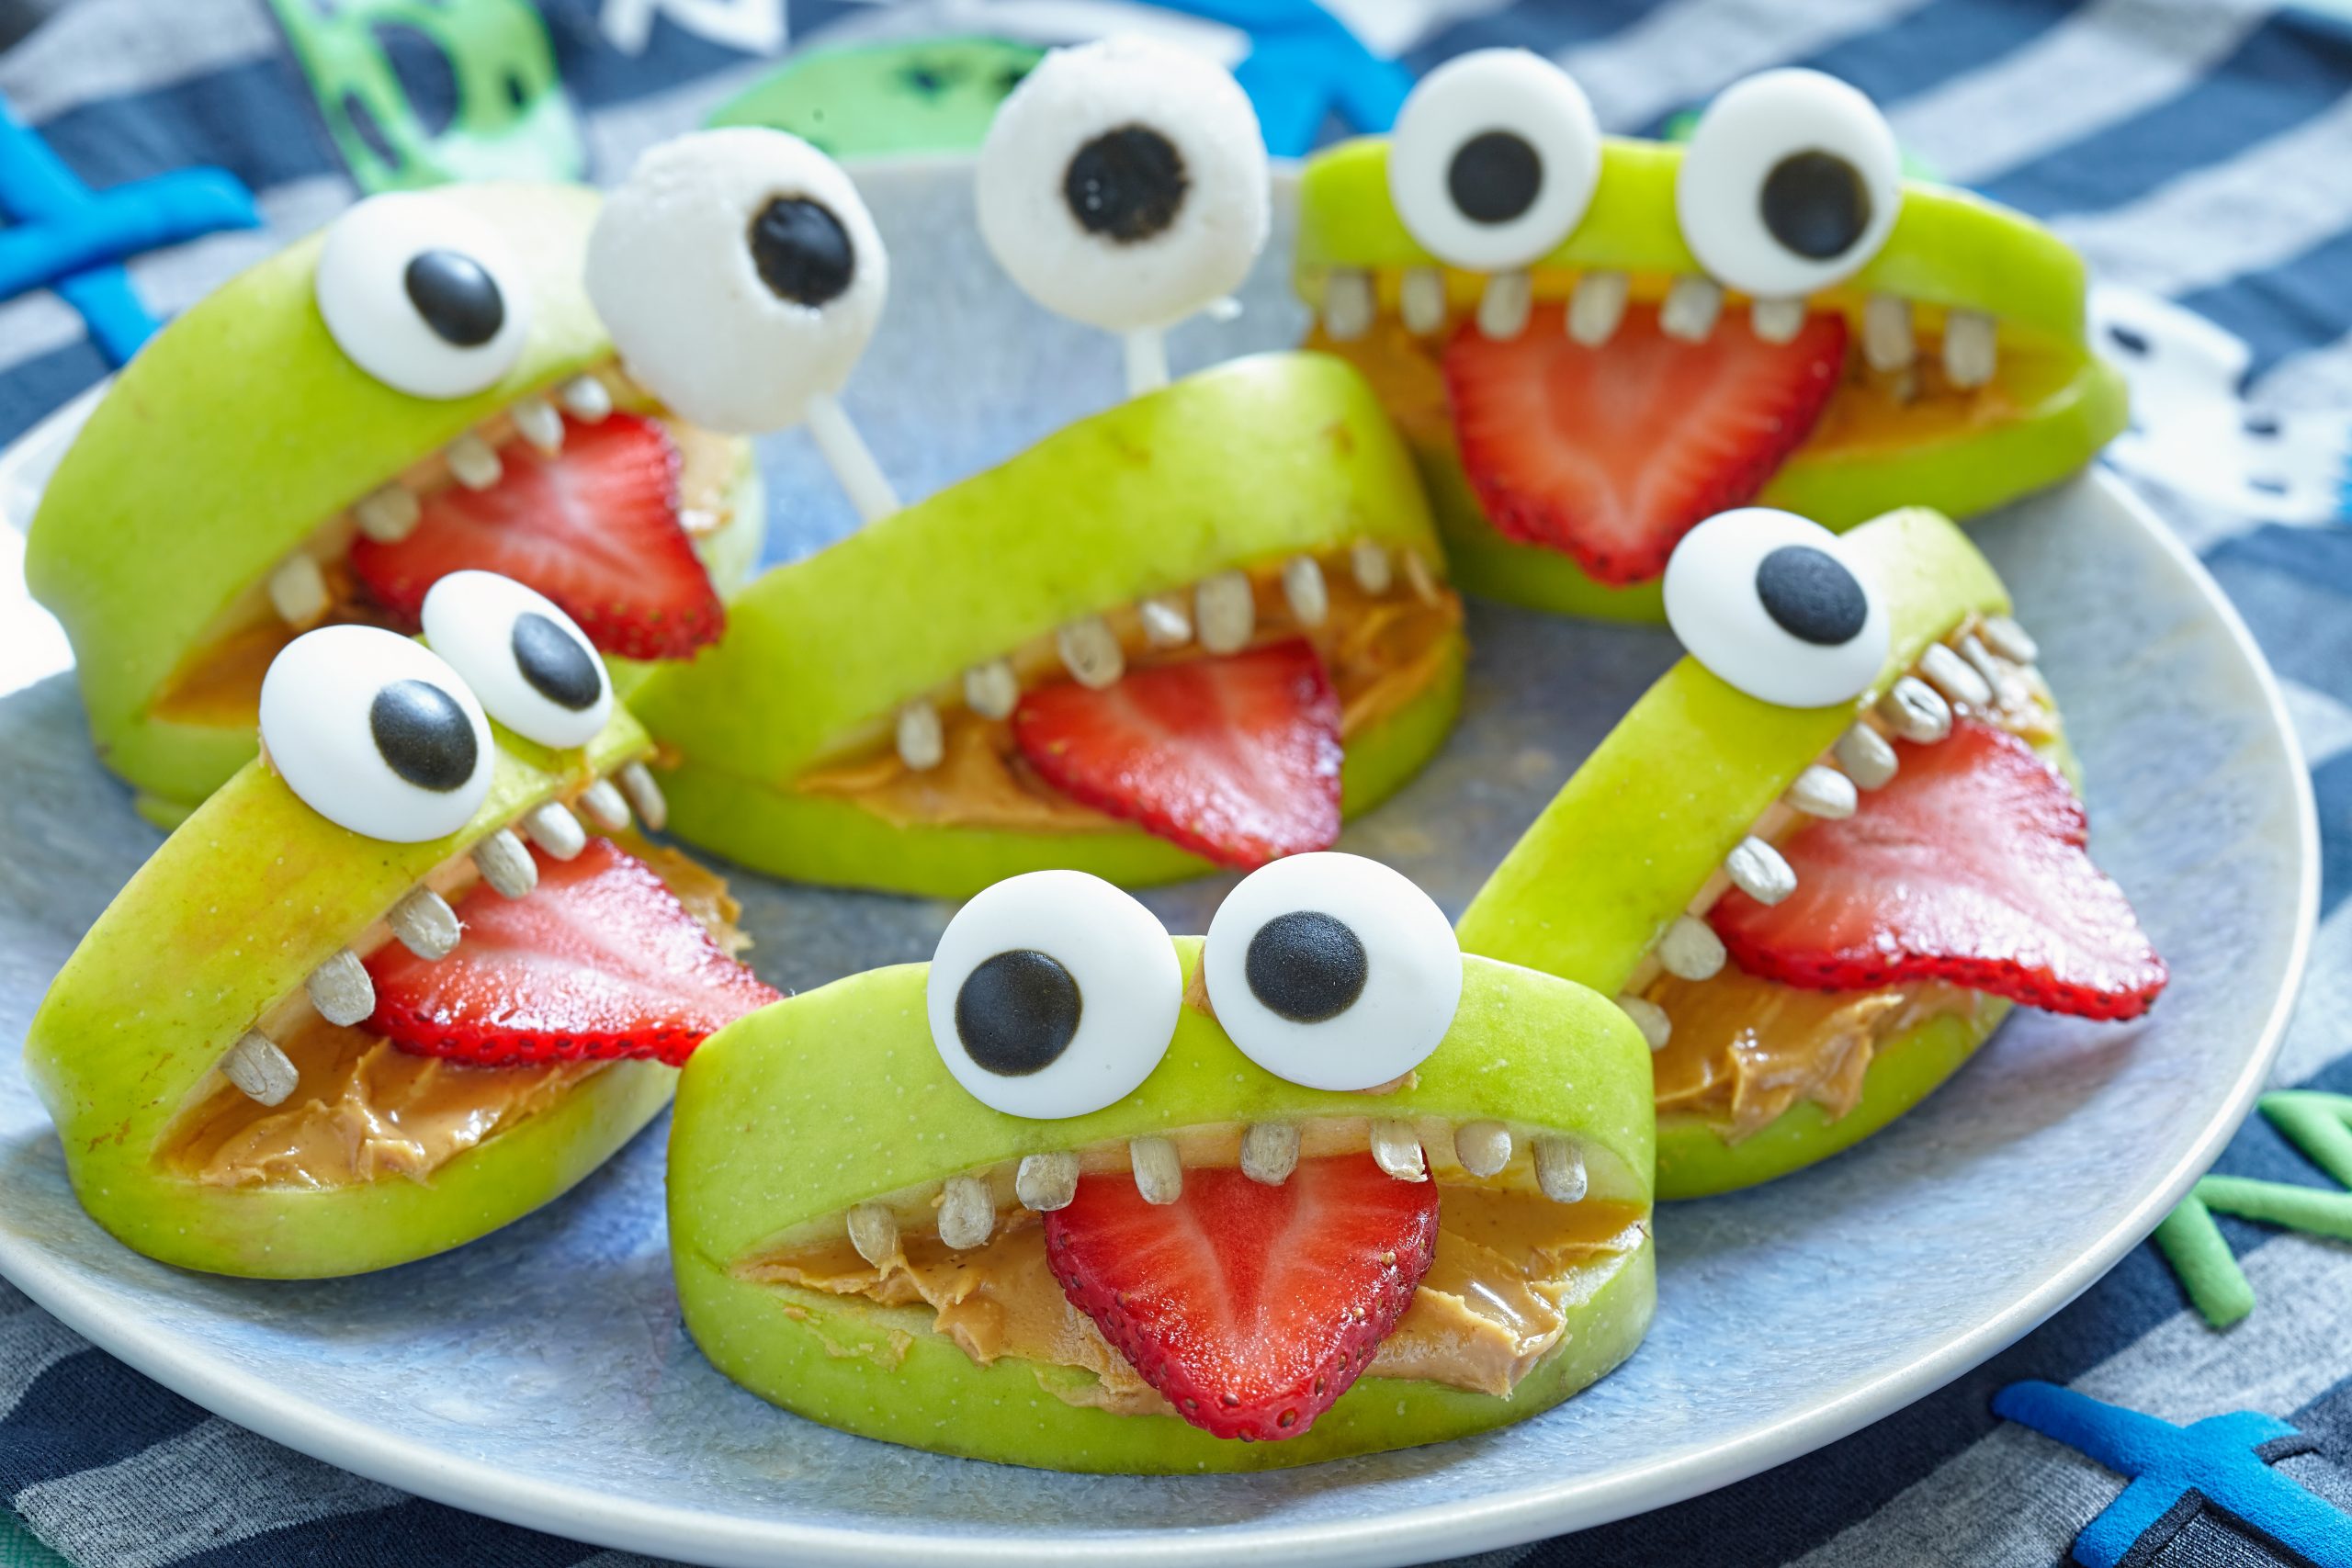 Ten Quick, Easy, and Delicious Halloween snacks your kids will love